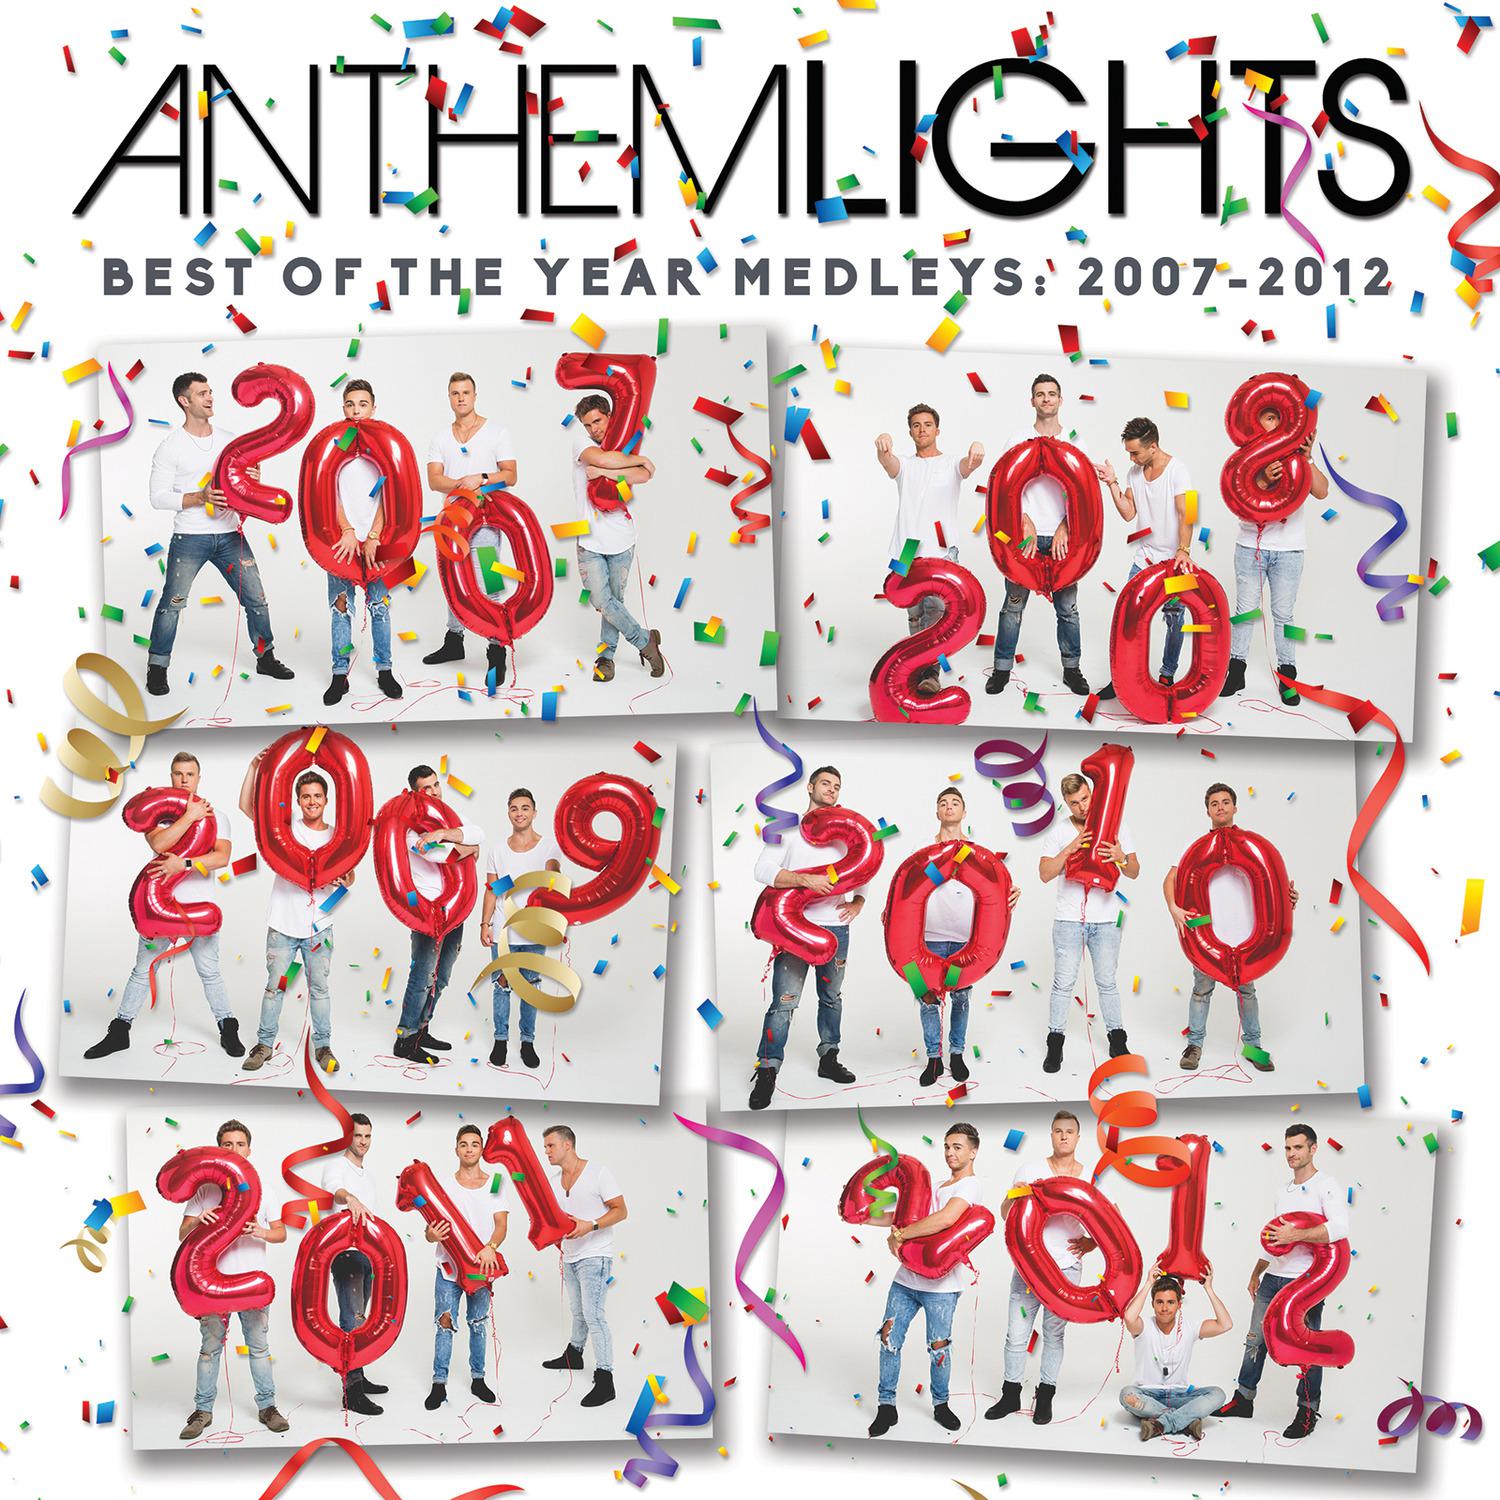 Best of 2012: Payphone / Call Me Maybe / Wide Awake / Starships / We Are Young歌词 歌手Anthem Lights-专辑Best of the Year Medleys: 2007 - 2012-单曲《Best of 2012: Payphone / Call Me Maybe / Wide Awake / Starships / We Are Young》LRC歌词下载